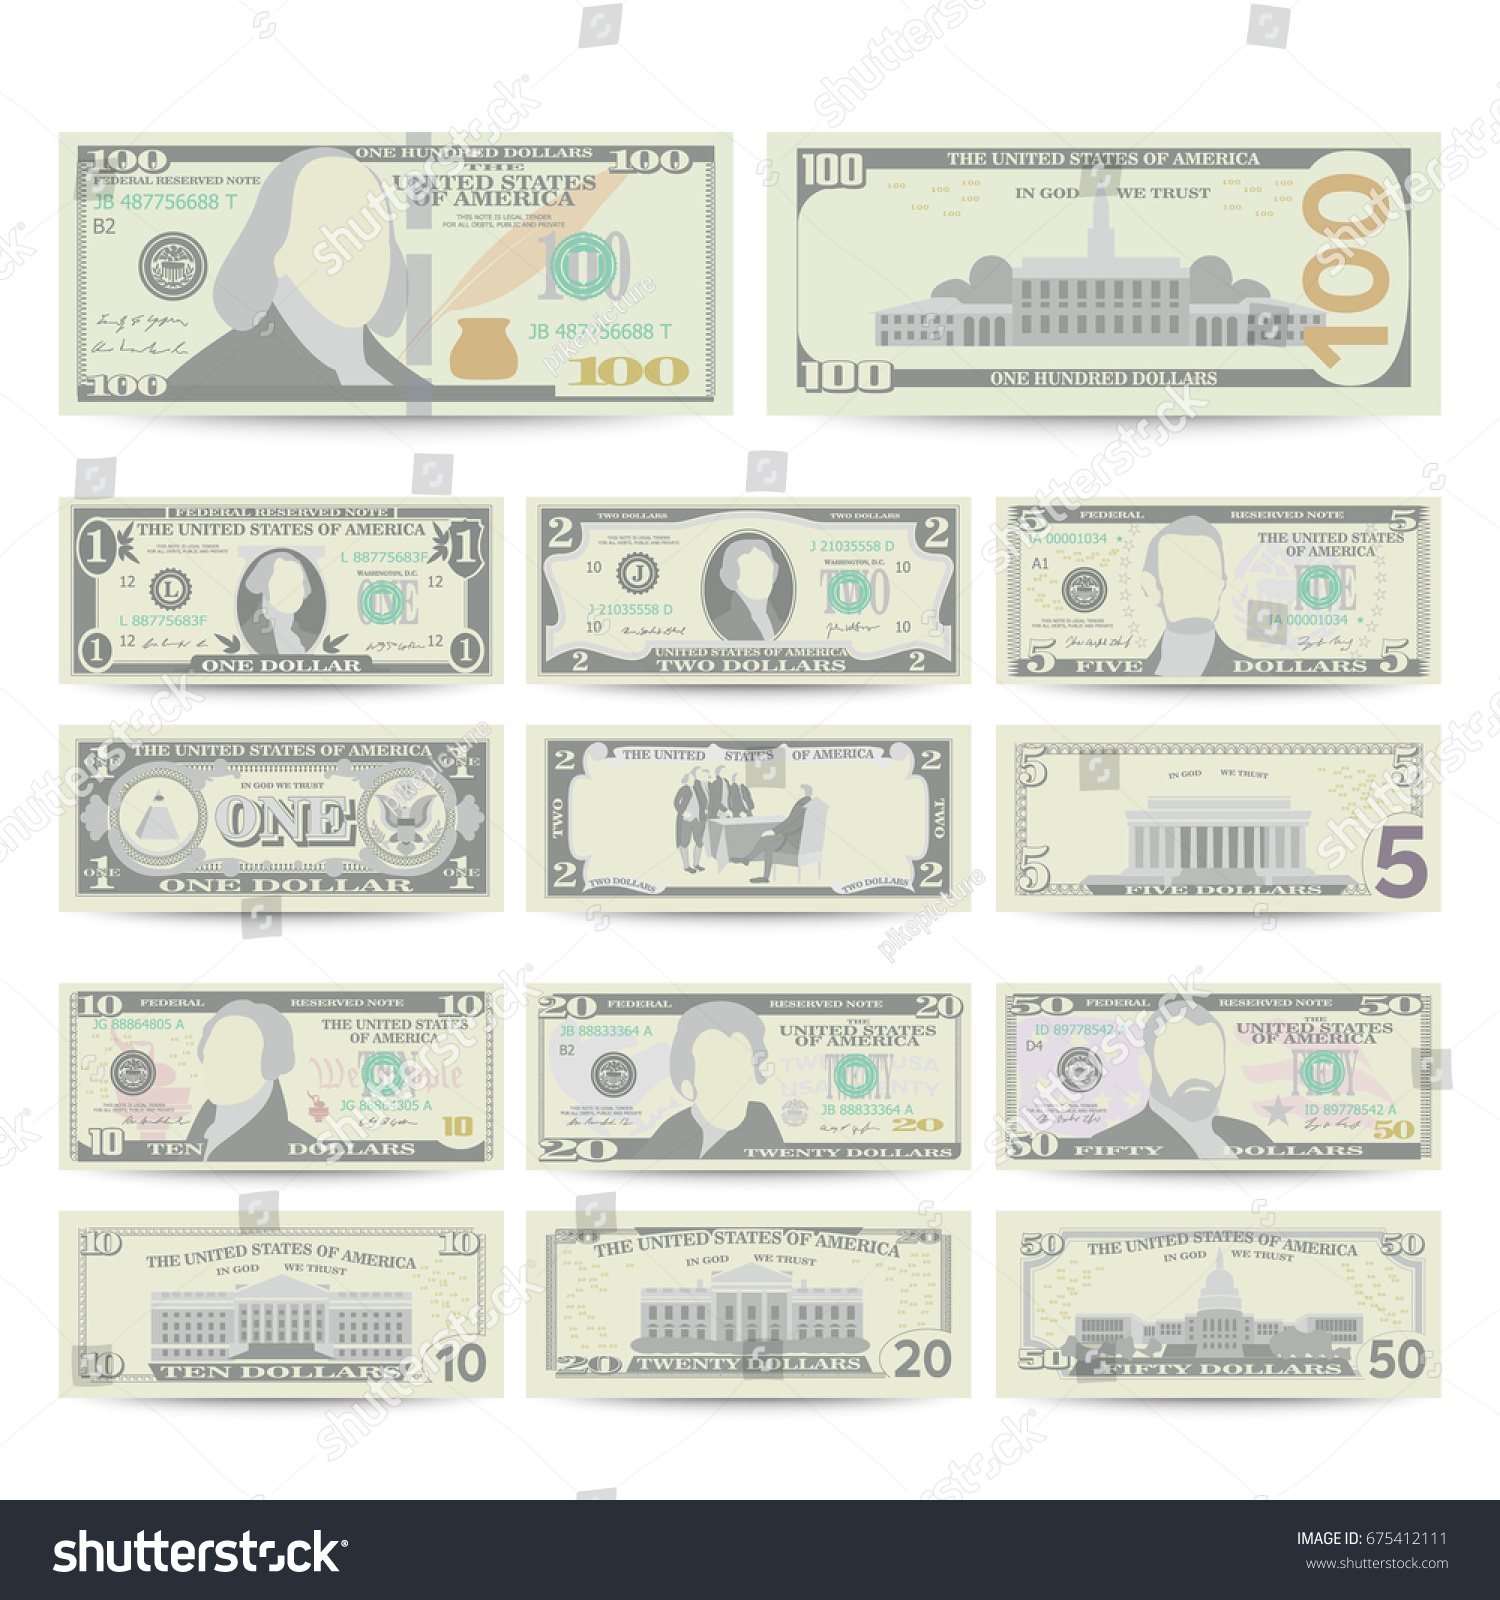 SVG of Dollars Bill Banknote Set Vector. Cartoon 100 US Currency. Two Sides Of American Money Bill Isolated Illustration. Dollar Cash Dollar Symbol. Every Denomination Of US Currency Note. svg